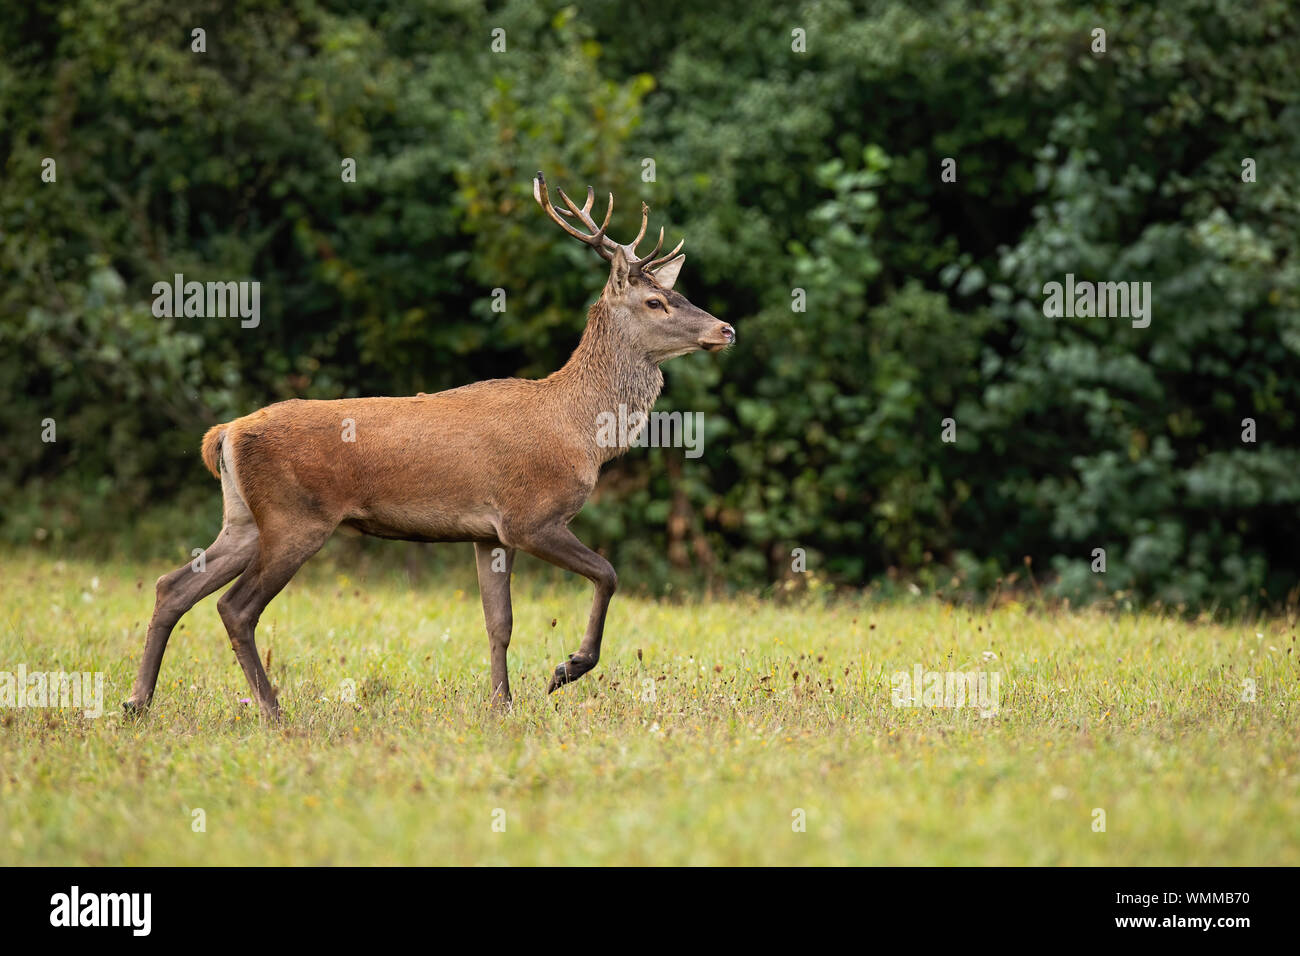 Red deer stag walking with leg mid-air in nature with copy space. Stock Photo